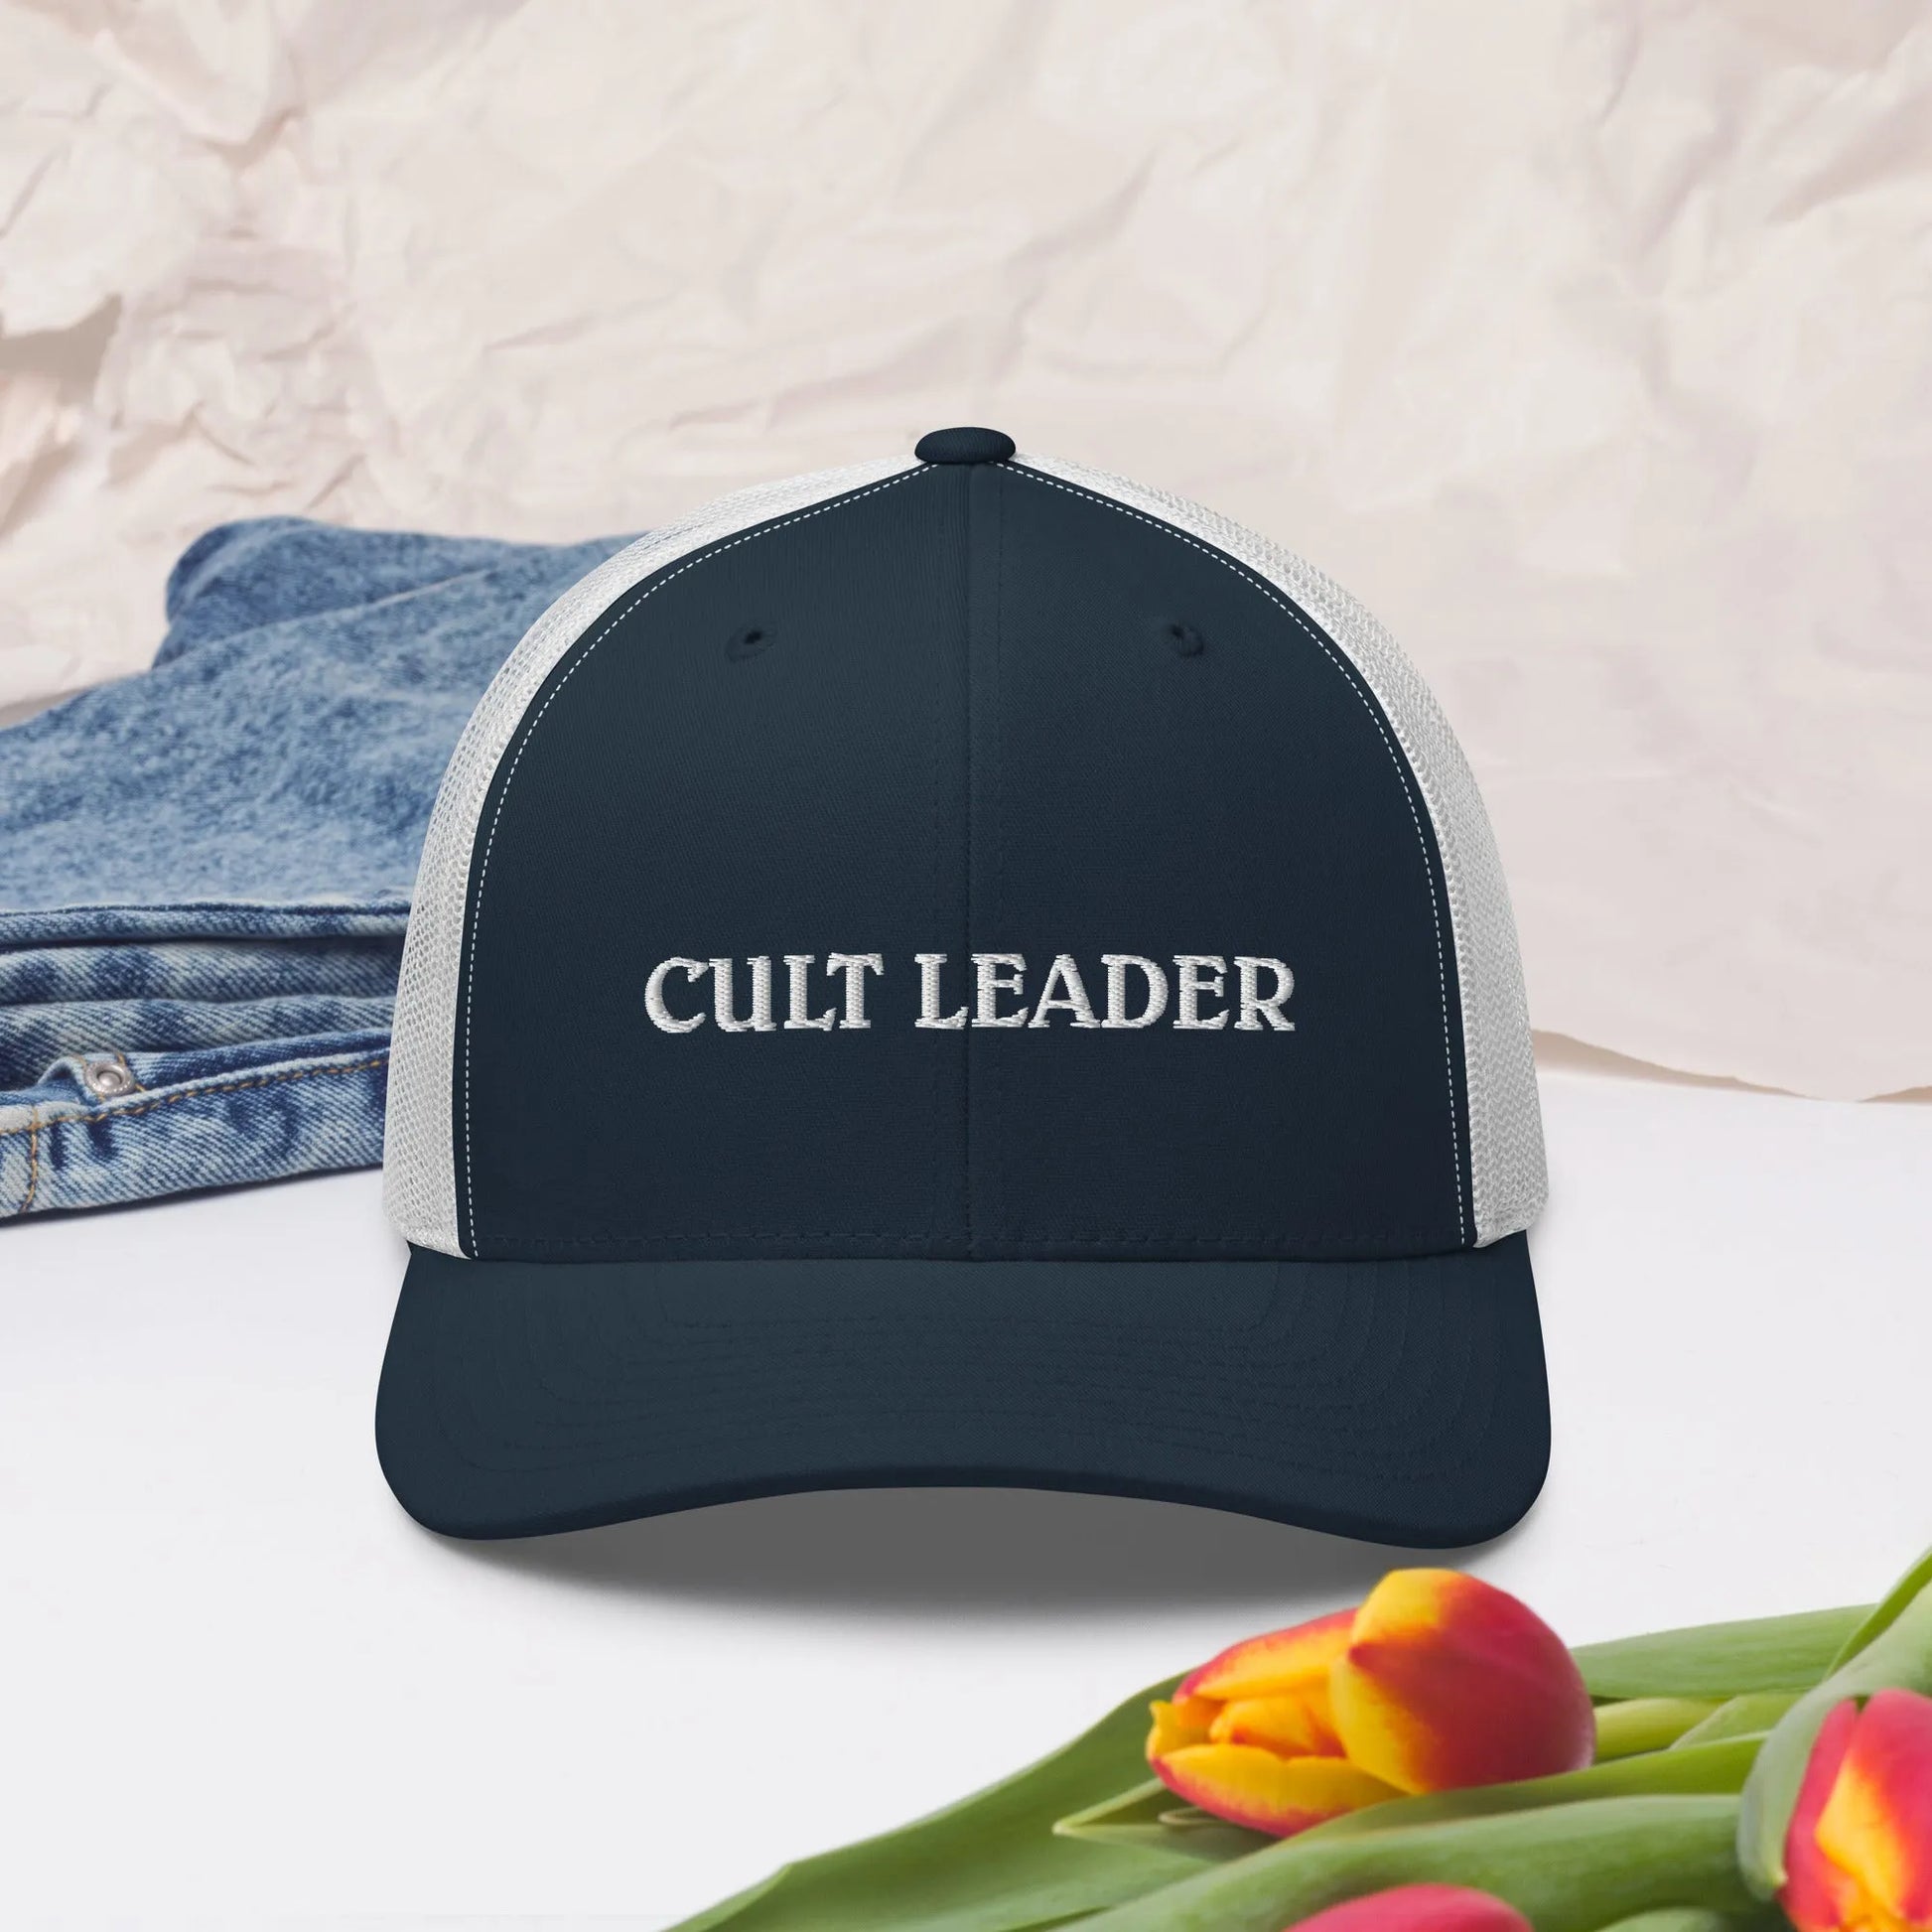 Cult Leader embroidered retro trucker hat by Rebel Girl Rampage